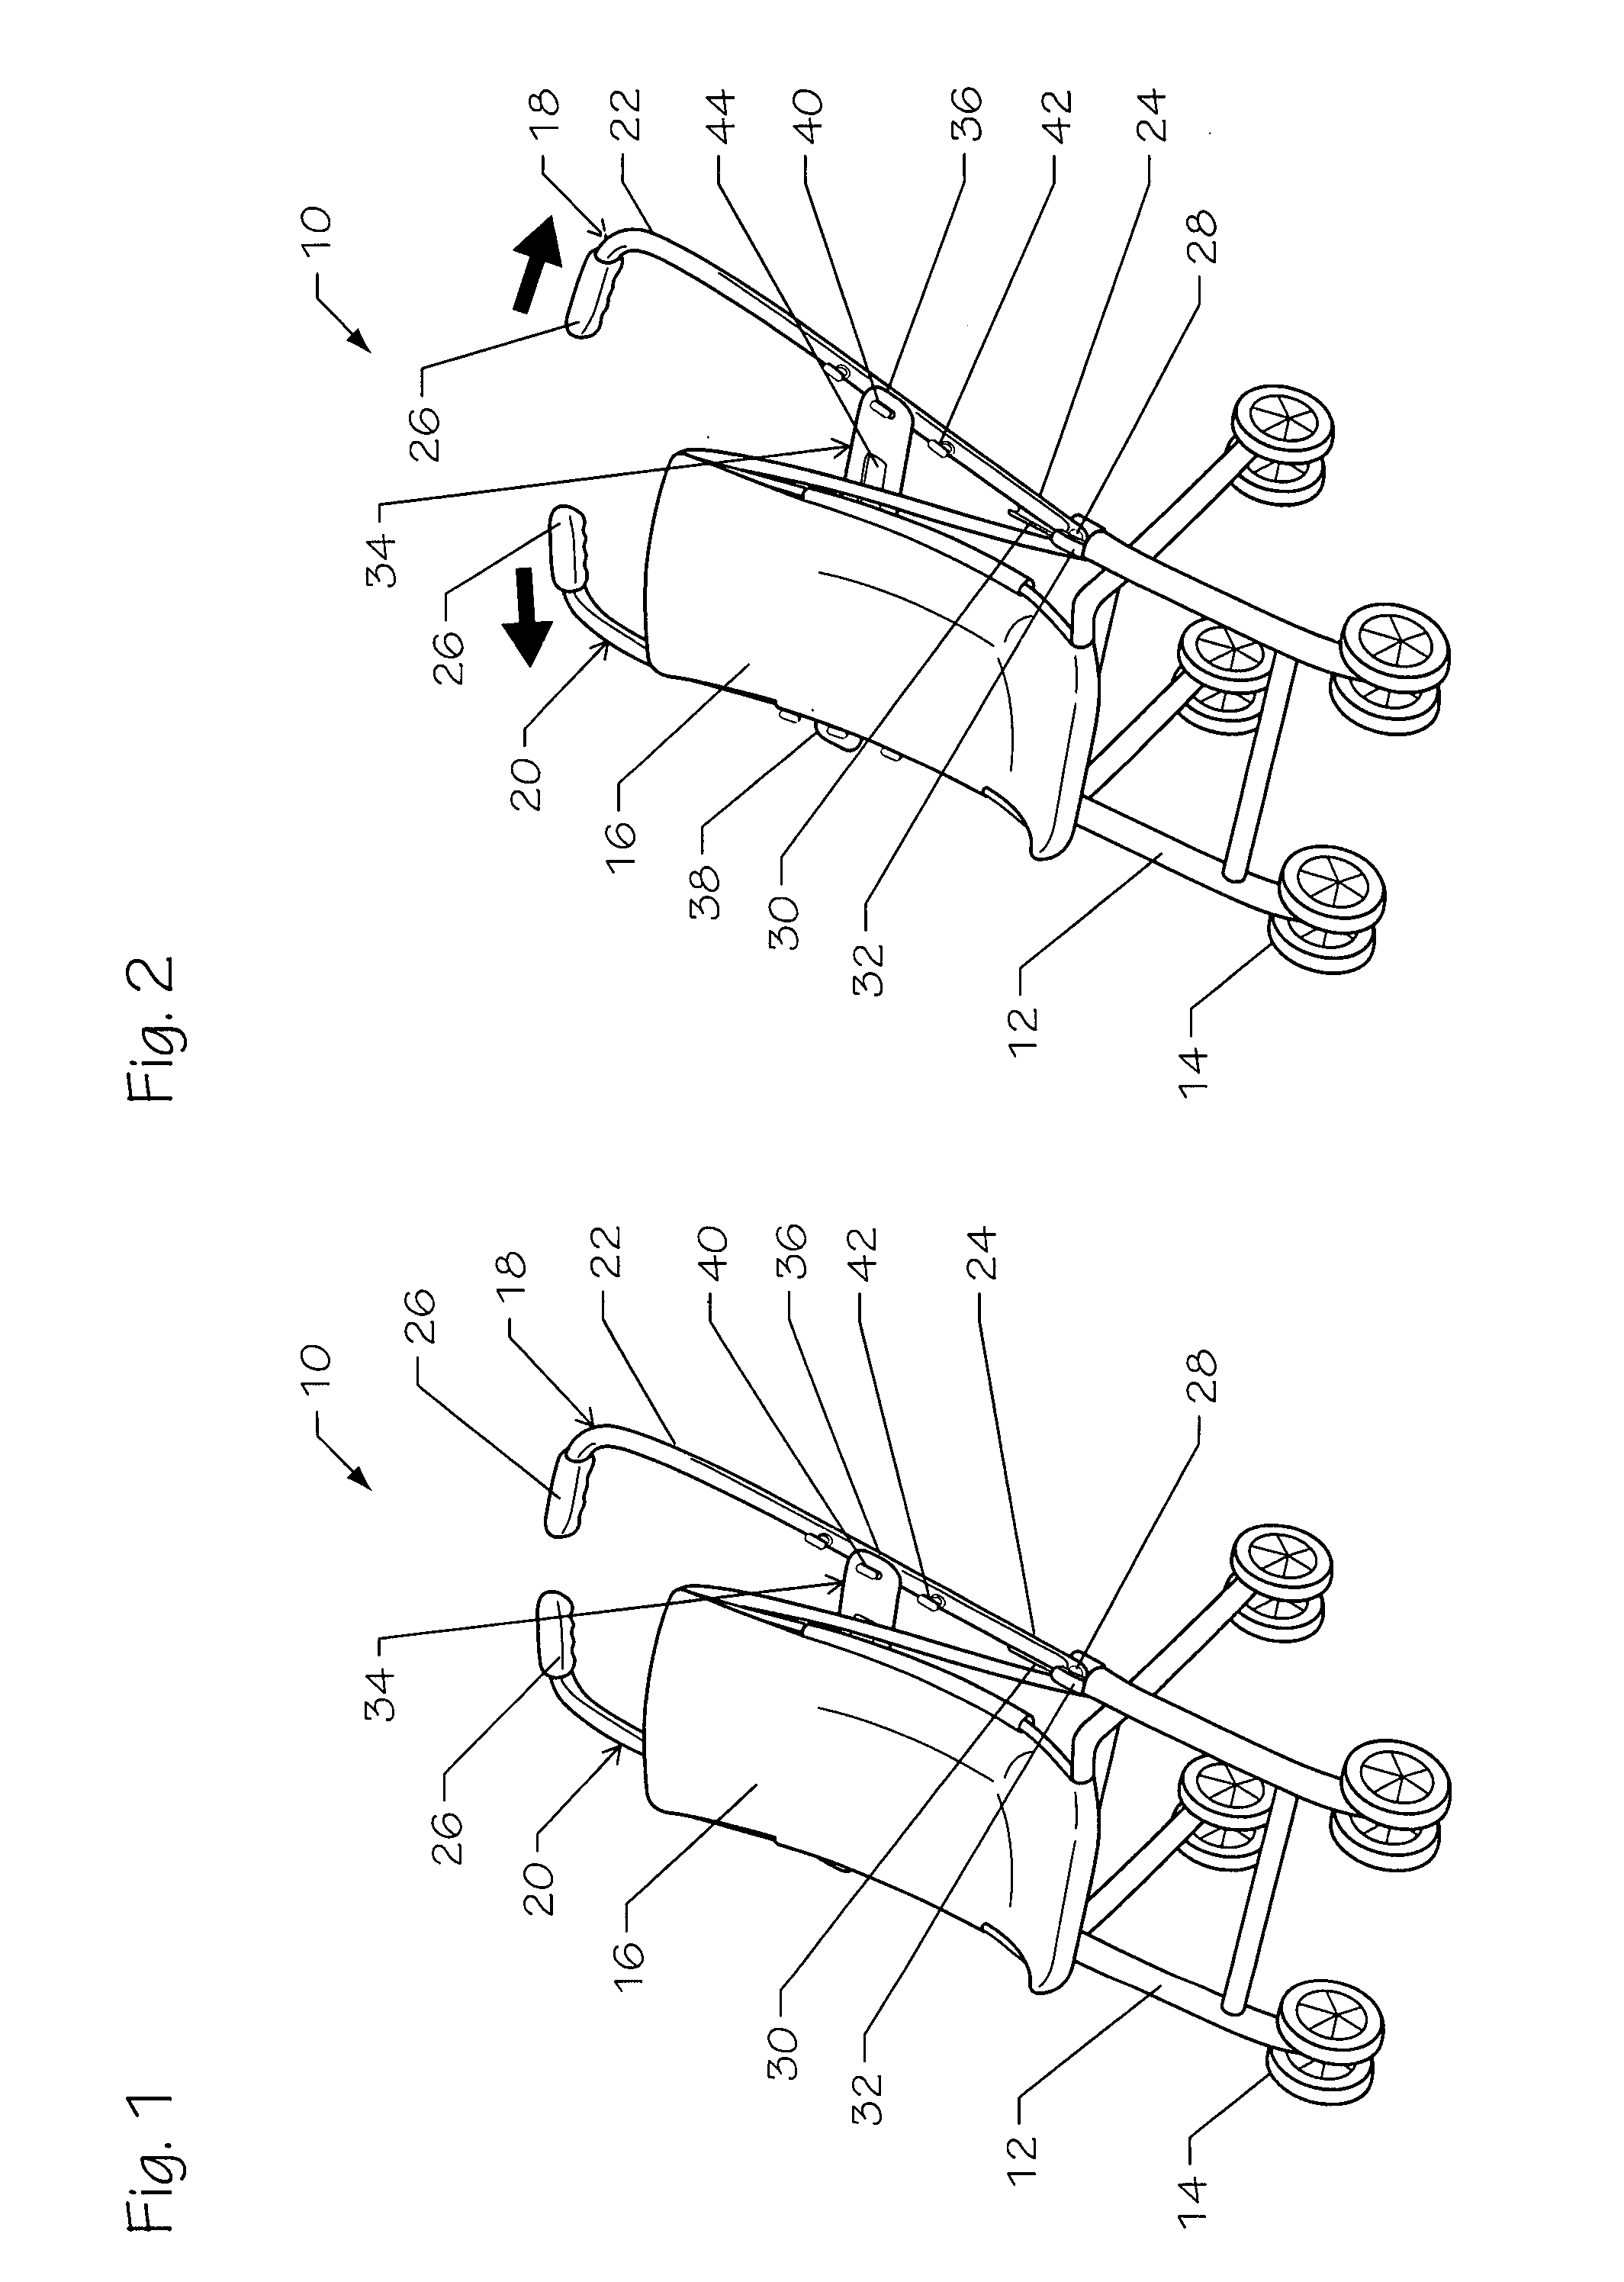 Exercise stroller device